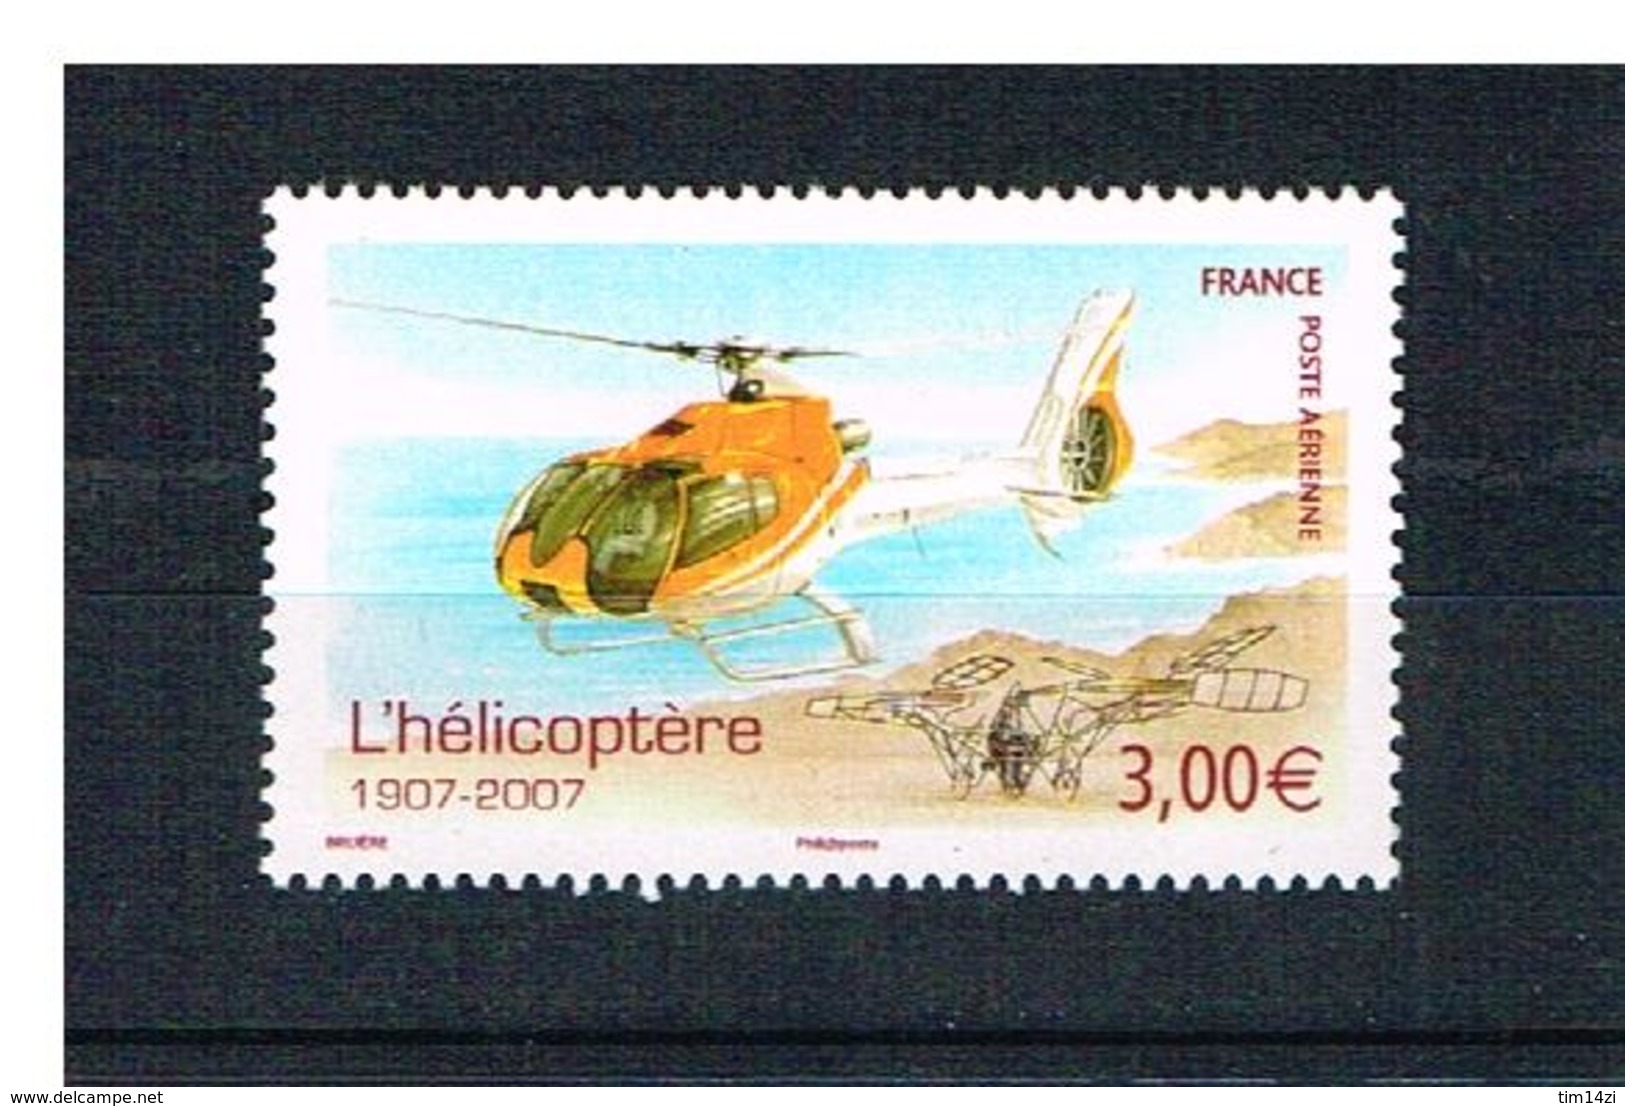 FRANCE - 2007 - N° 70-  POSTE AERIENNE - NEUF** - HELICOPTERE EC 130 - Y & T -COTE :8,00 Euros - 1960-.... Mint/hinged